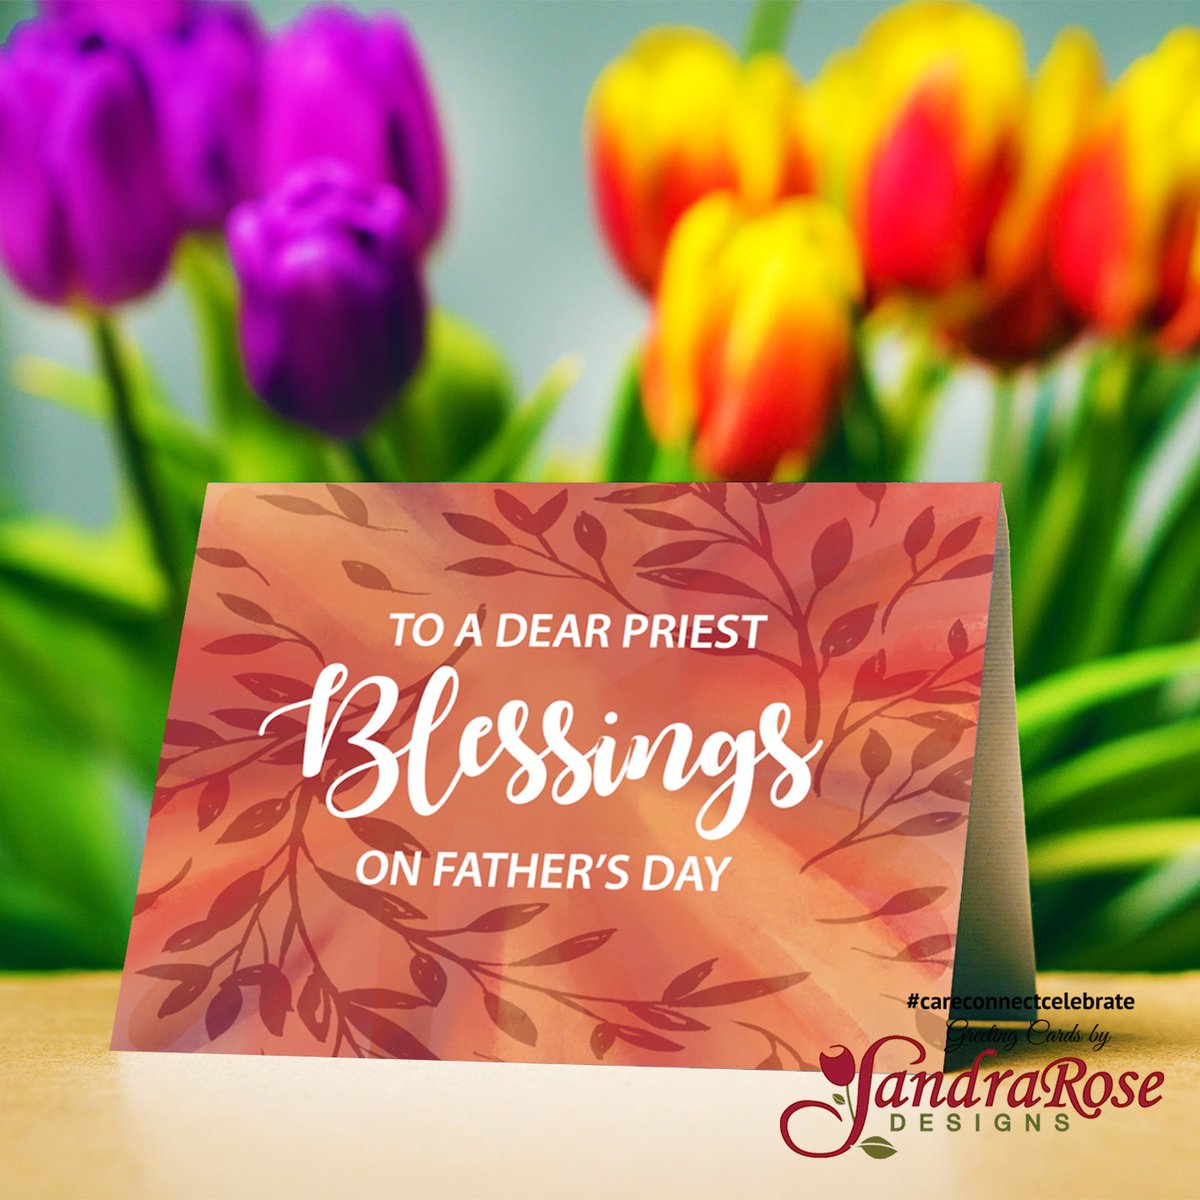 Send blessings to a priest on Father's Day. As your spiritual father, this card will let him know you appreciate all of the sacrifices he makes. #CareConnectCelebrate #SandraRoseDesigns
@GCUniverse #Greetingcards #Greetingcard #fathersday greetingcarduniverse.com/holiday-cards/…